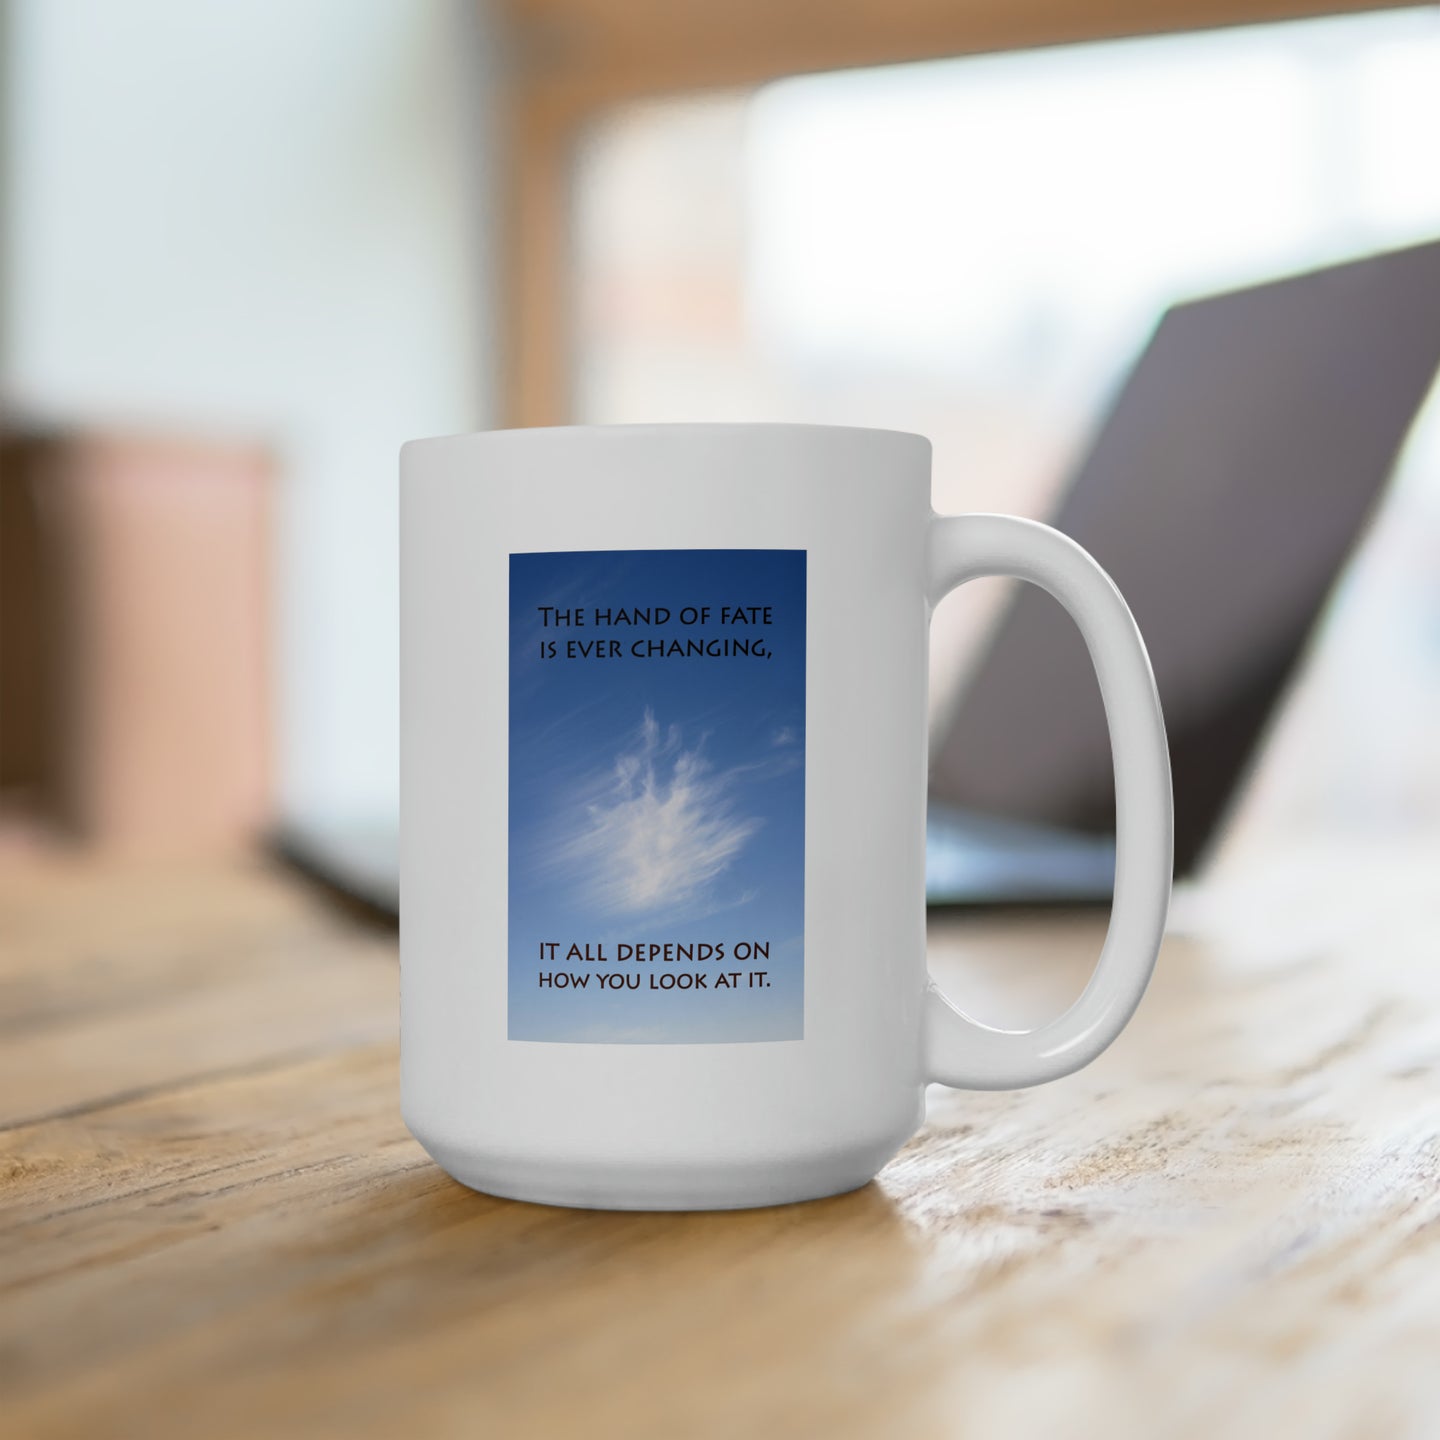 The hand of fate is ever changing... | Inspirational Motivational Quote Ceramic Mug | 15oz | White | Cloud Sky